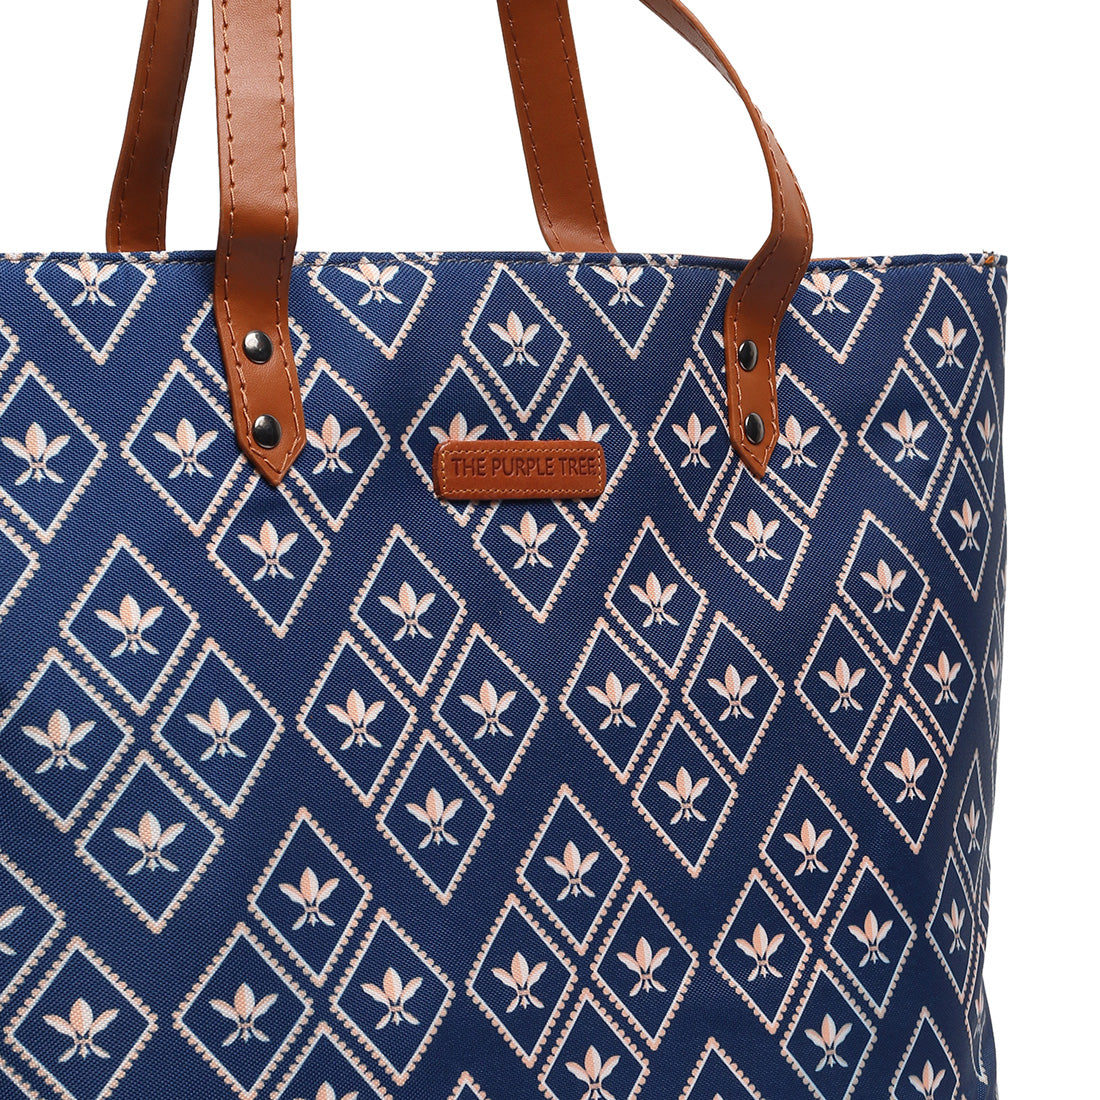 A chic tote bag in blue and brown colors near a wooden chair